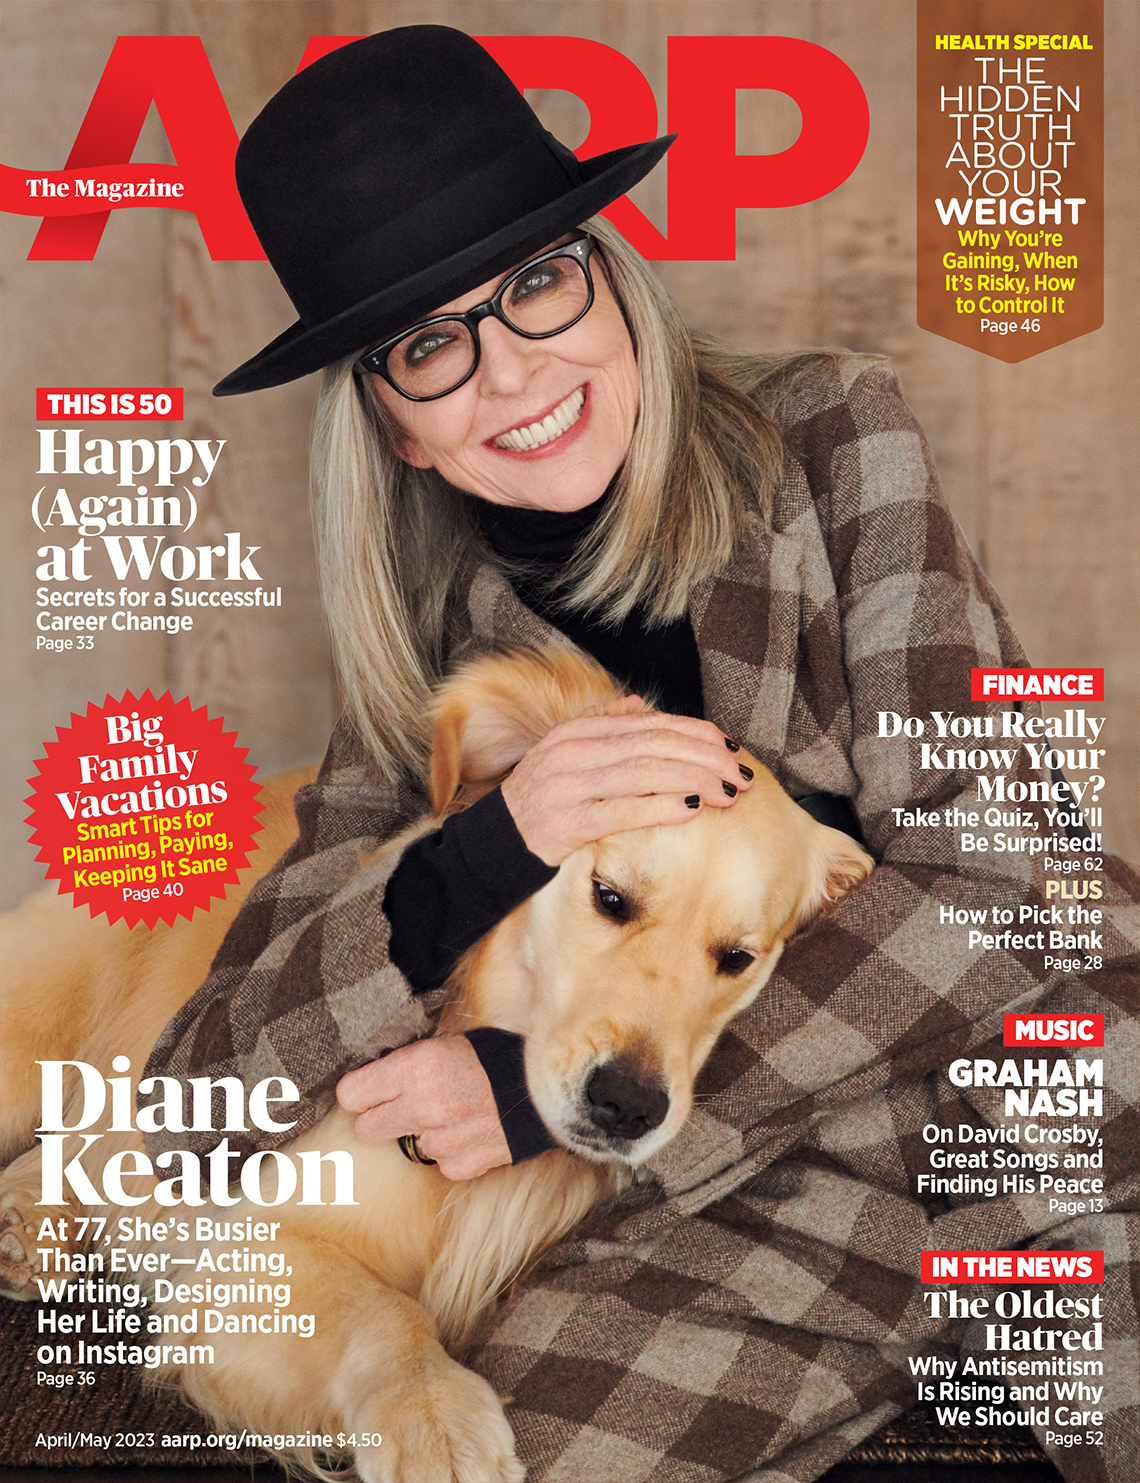 a a r p the magazine cover april / may 2023 featuring diane keaton holding dog